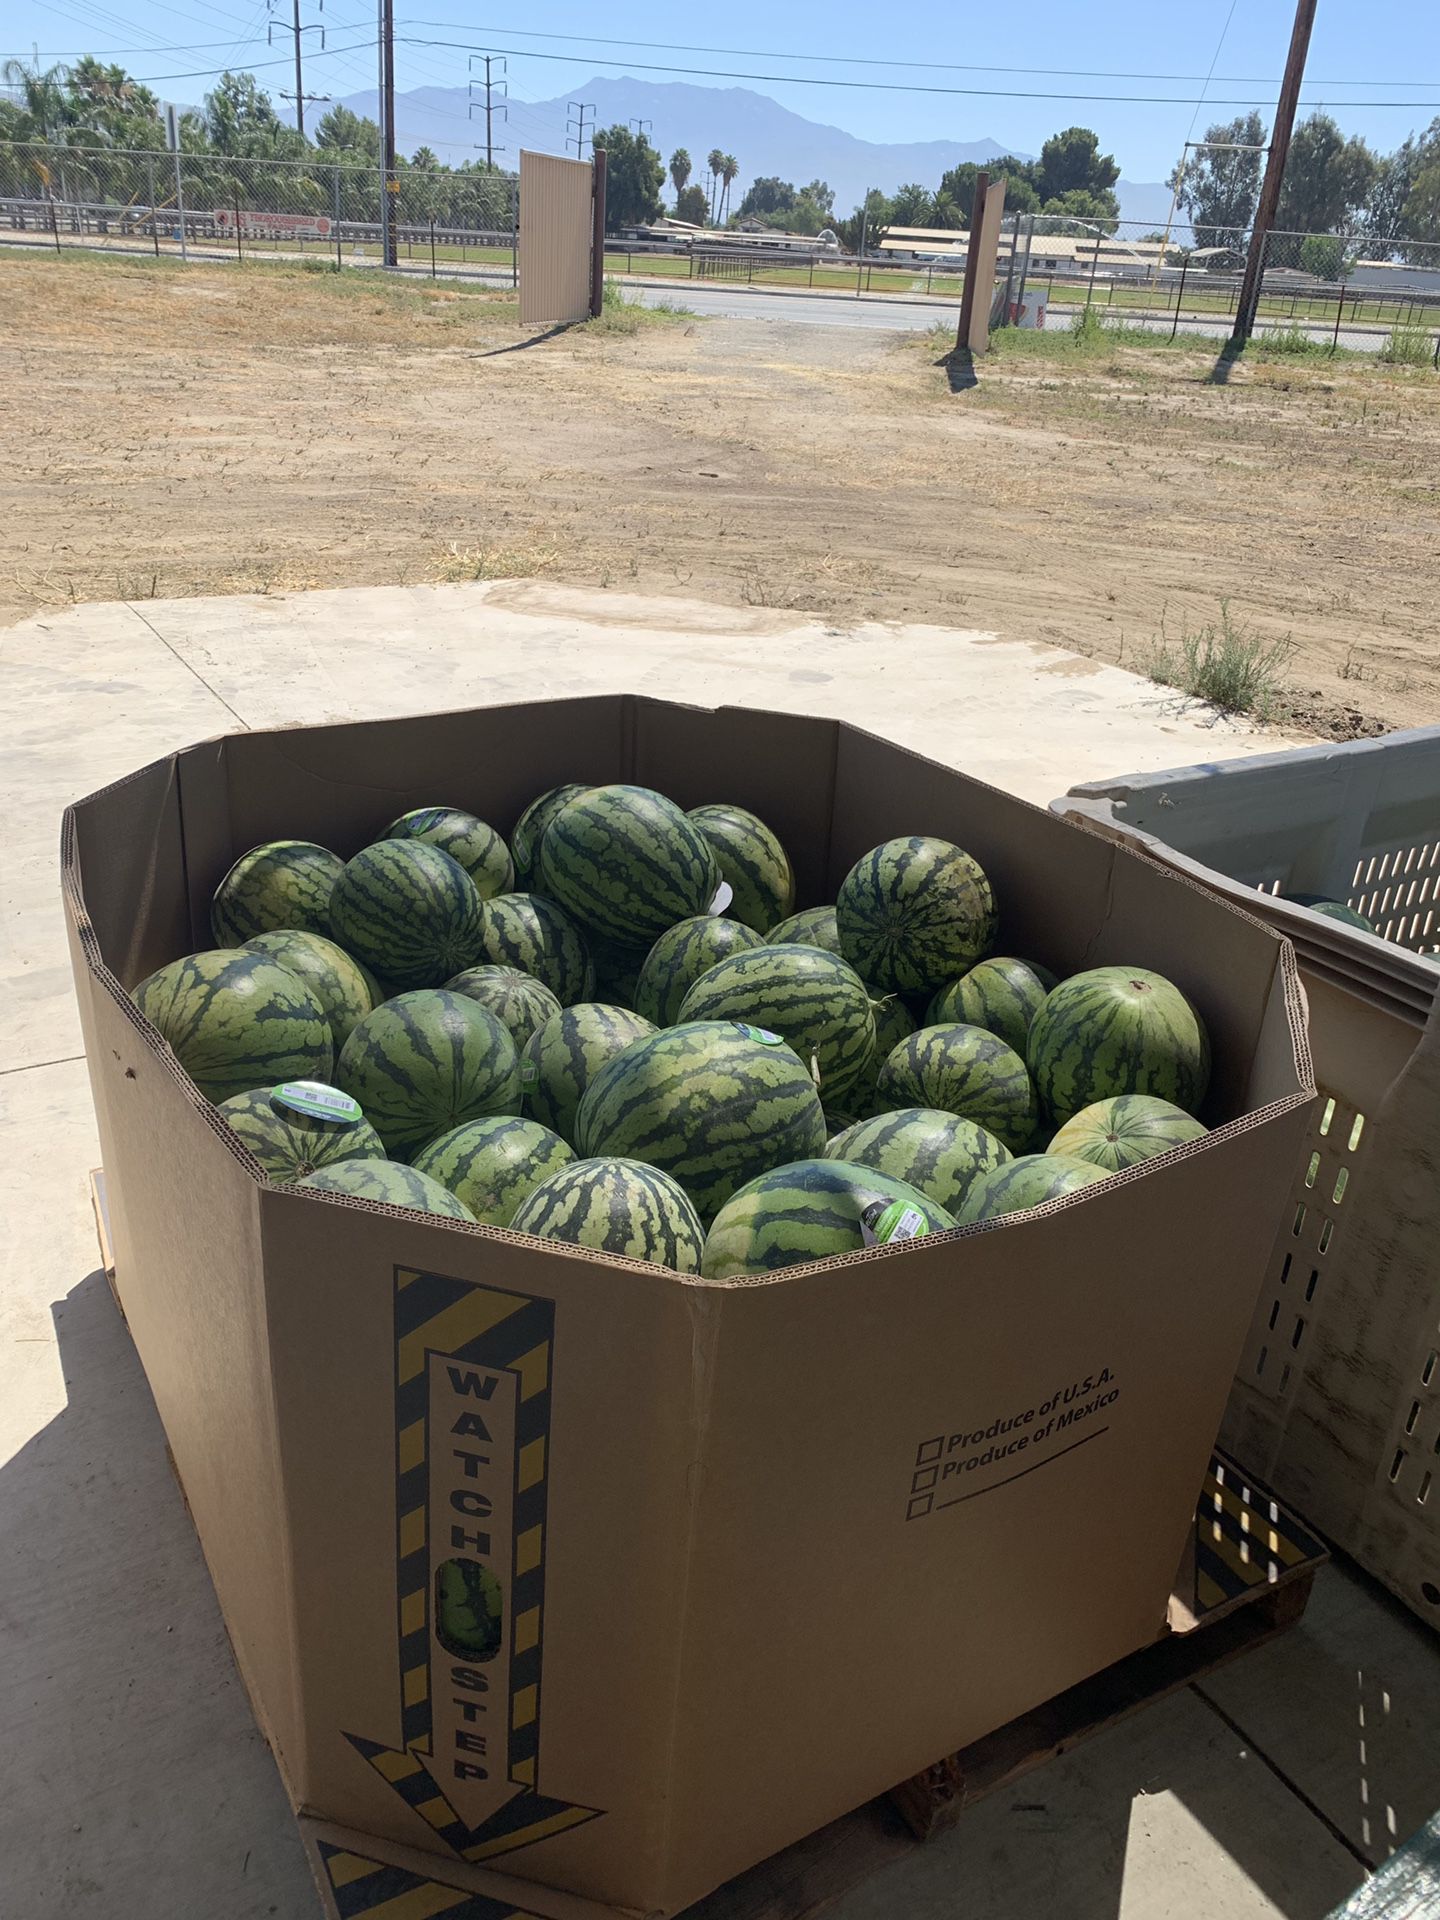 Watermelons $2 dlls We are located in C and R farms, HEMET CA